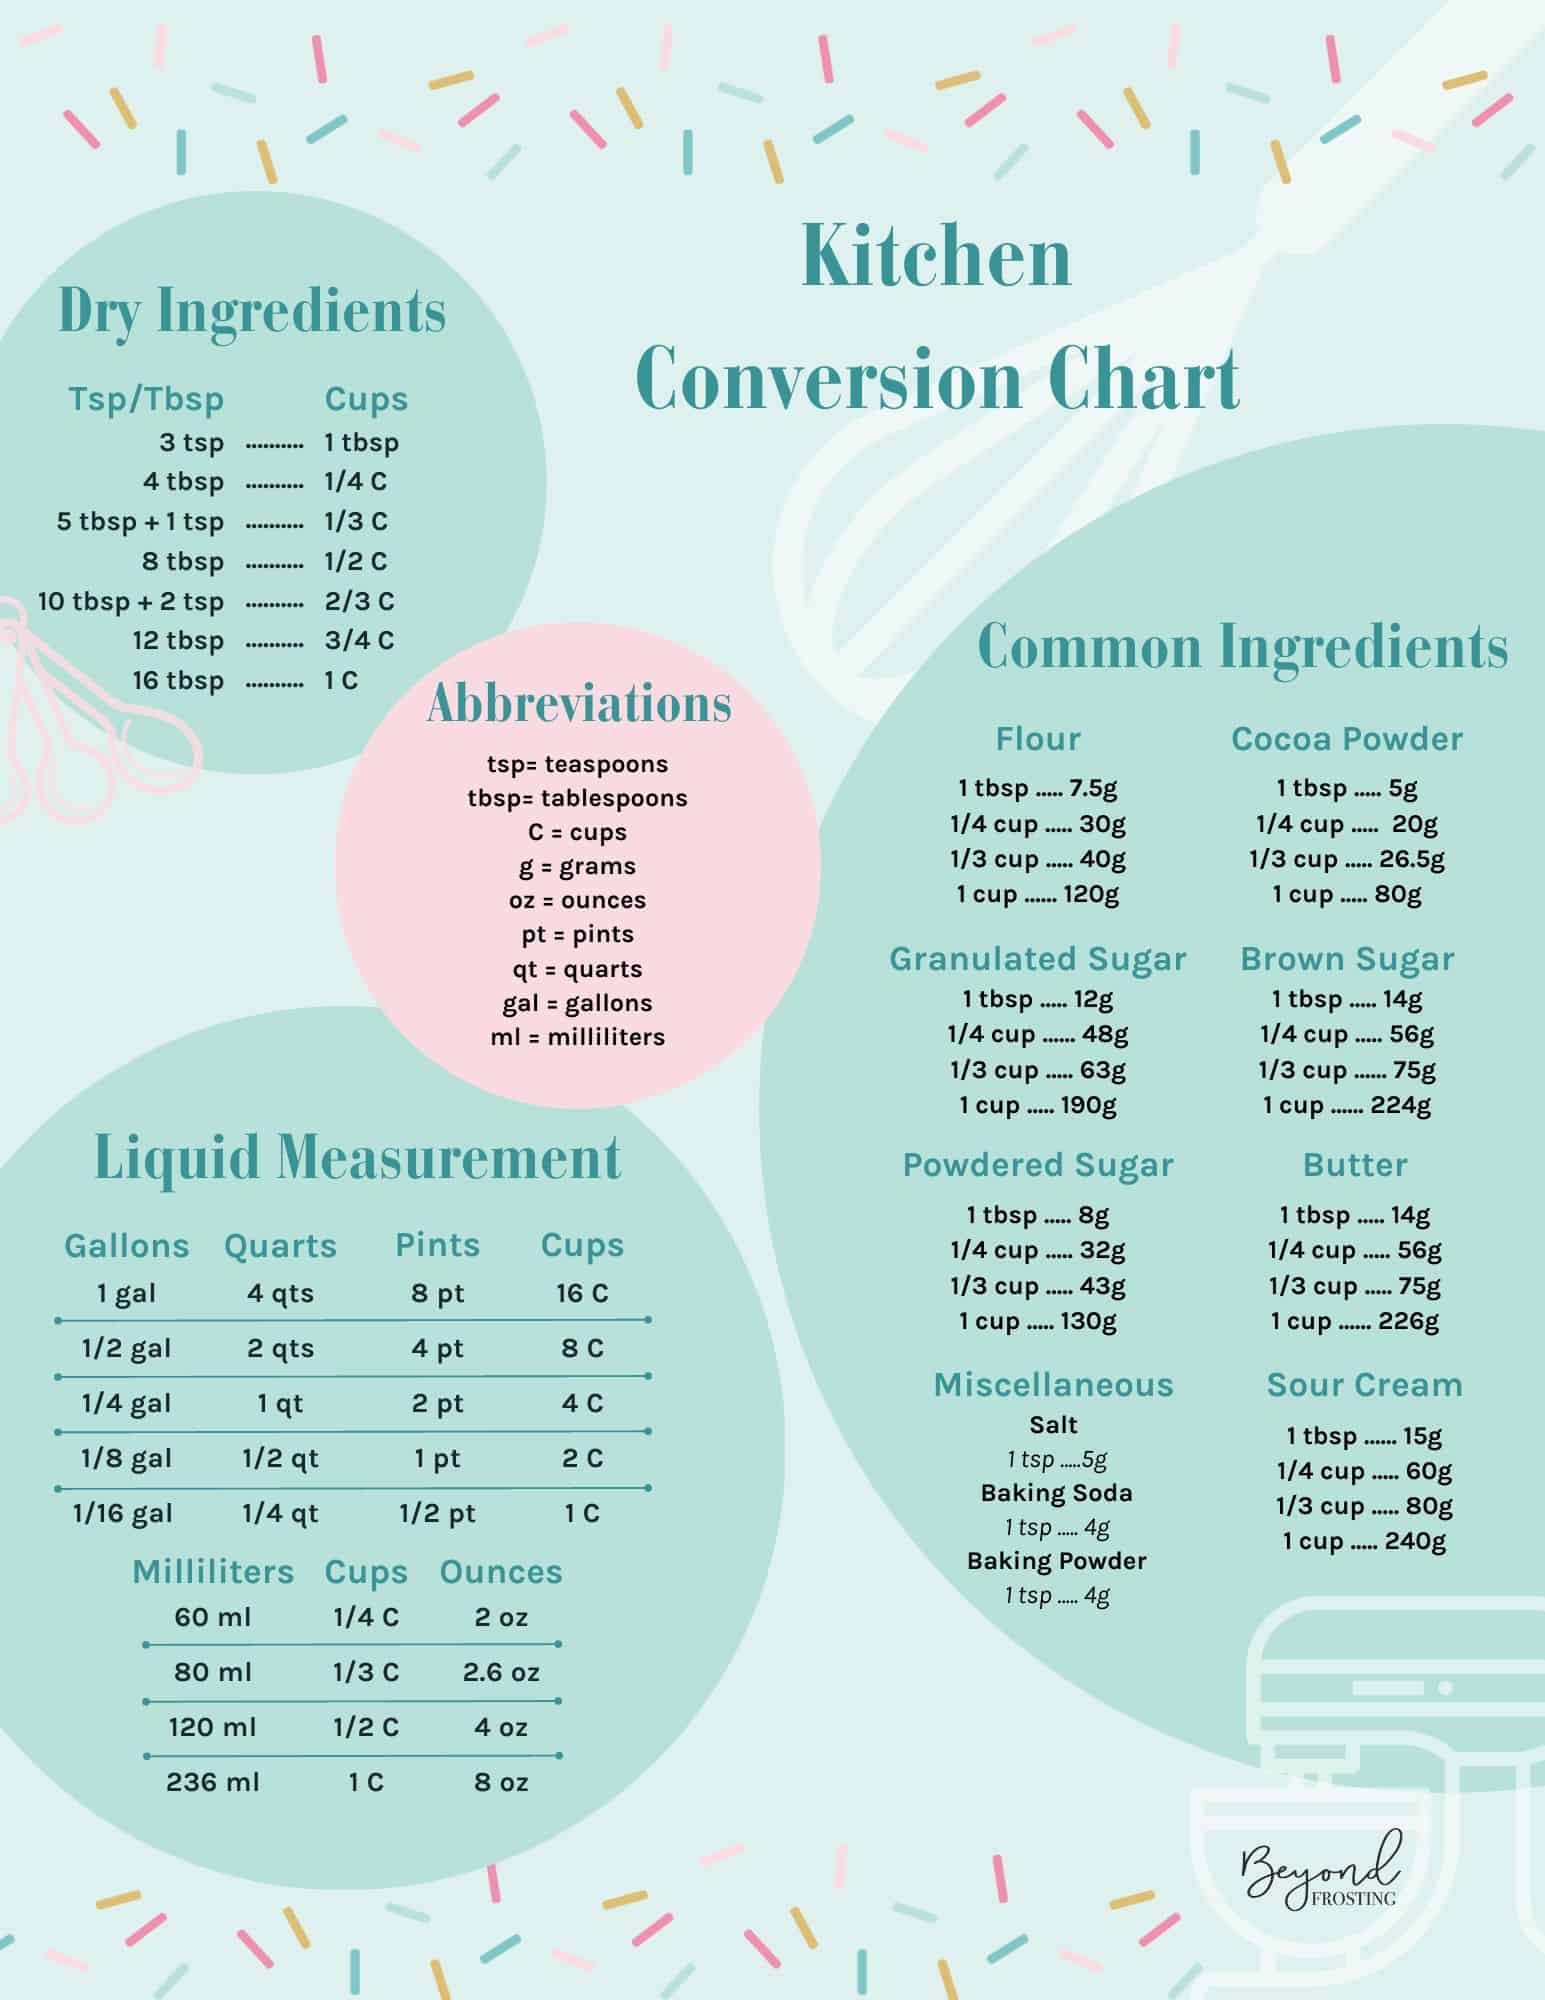 How Many Tablespoons in a Cup, and Other Conversions